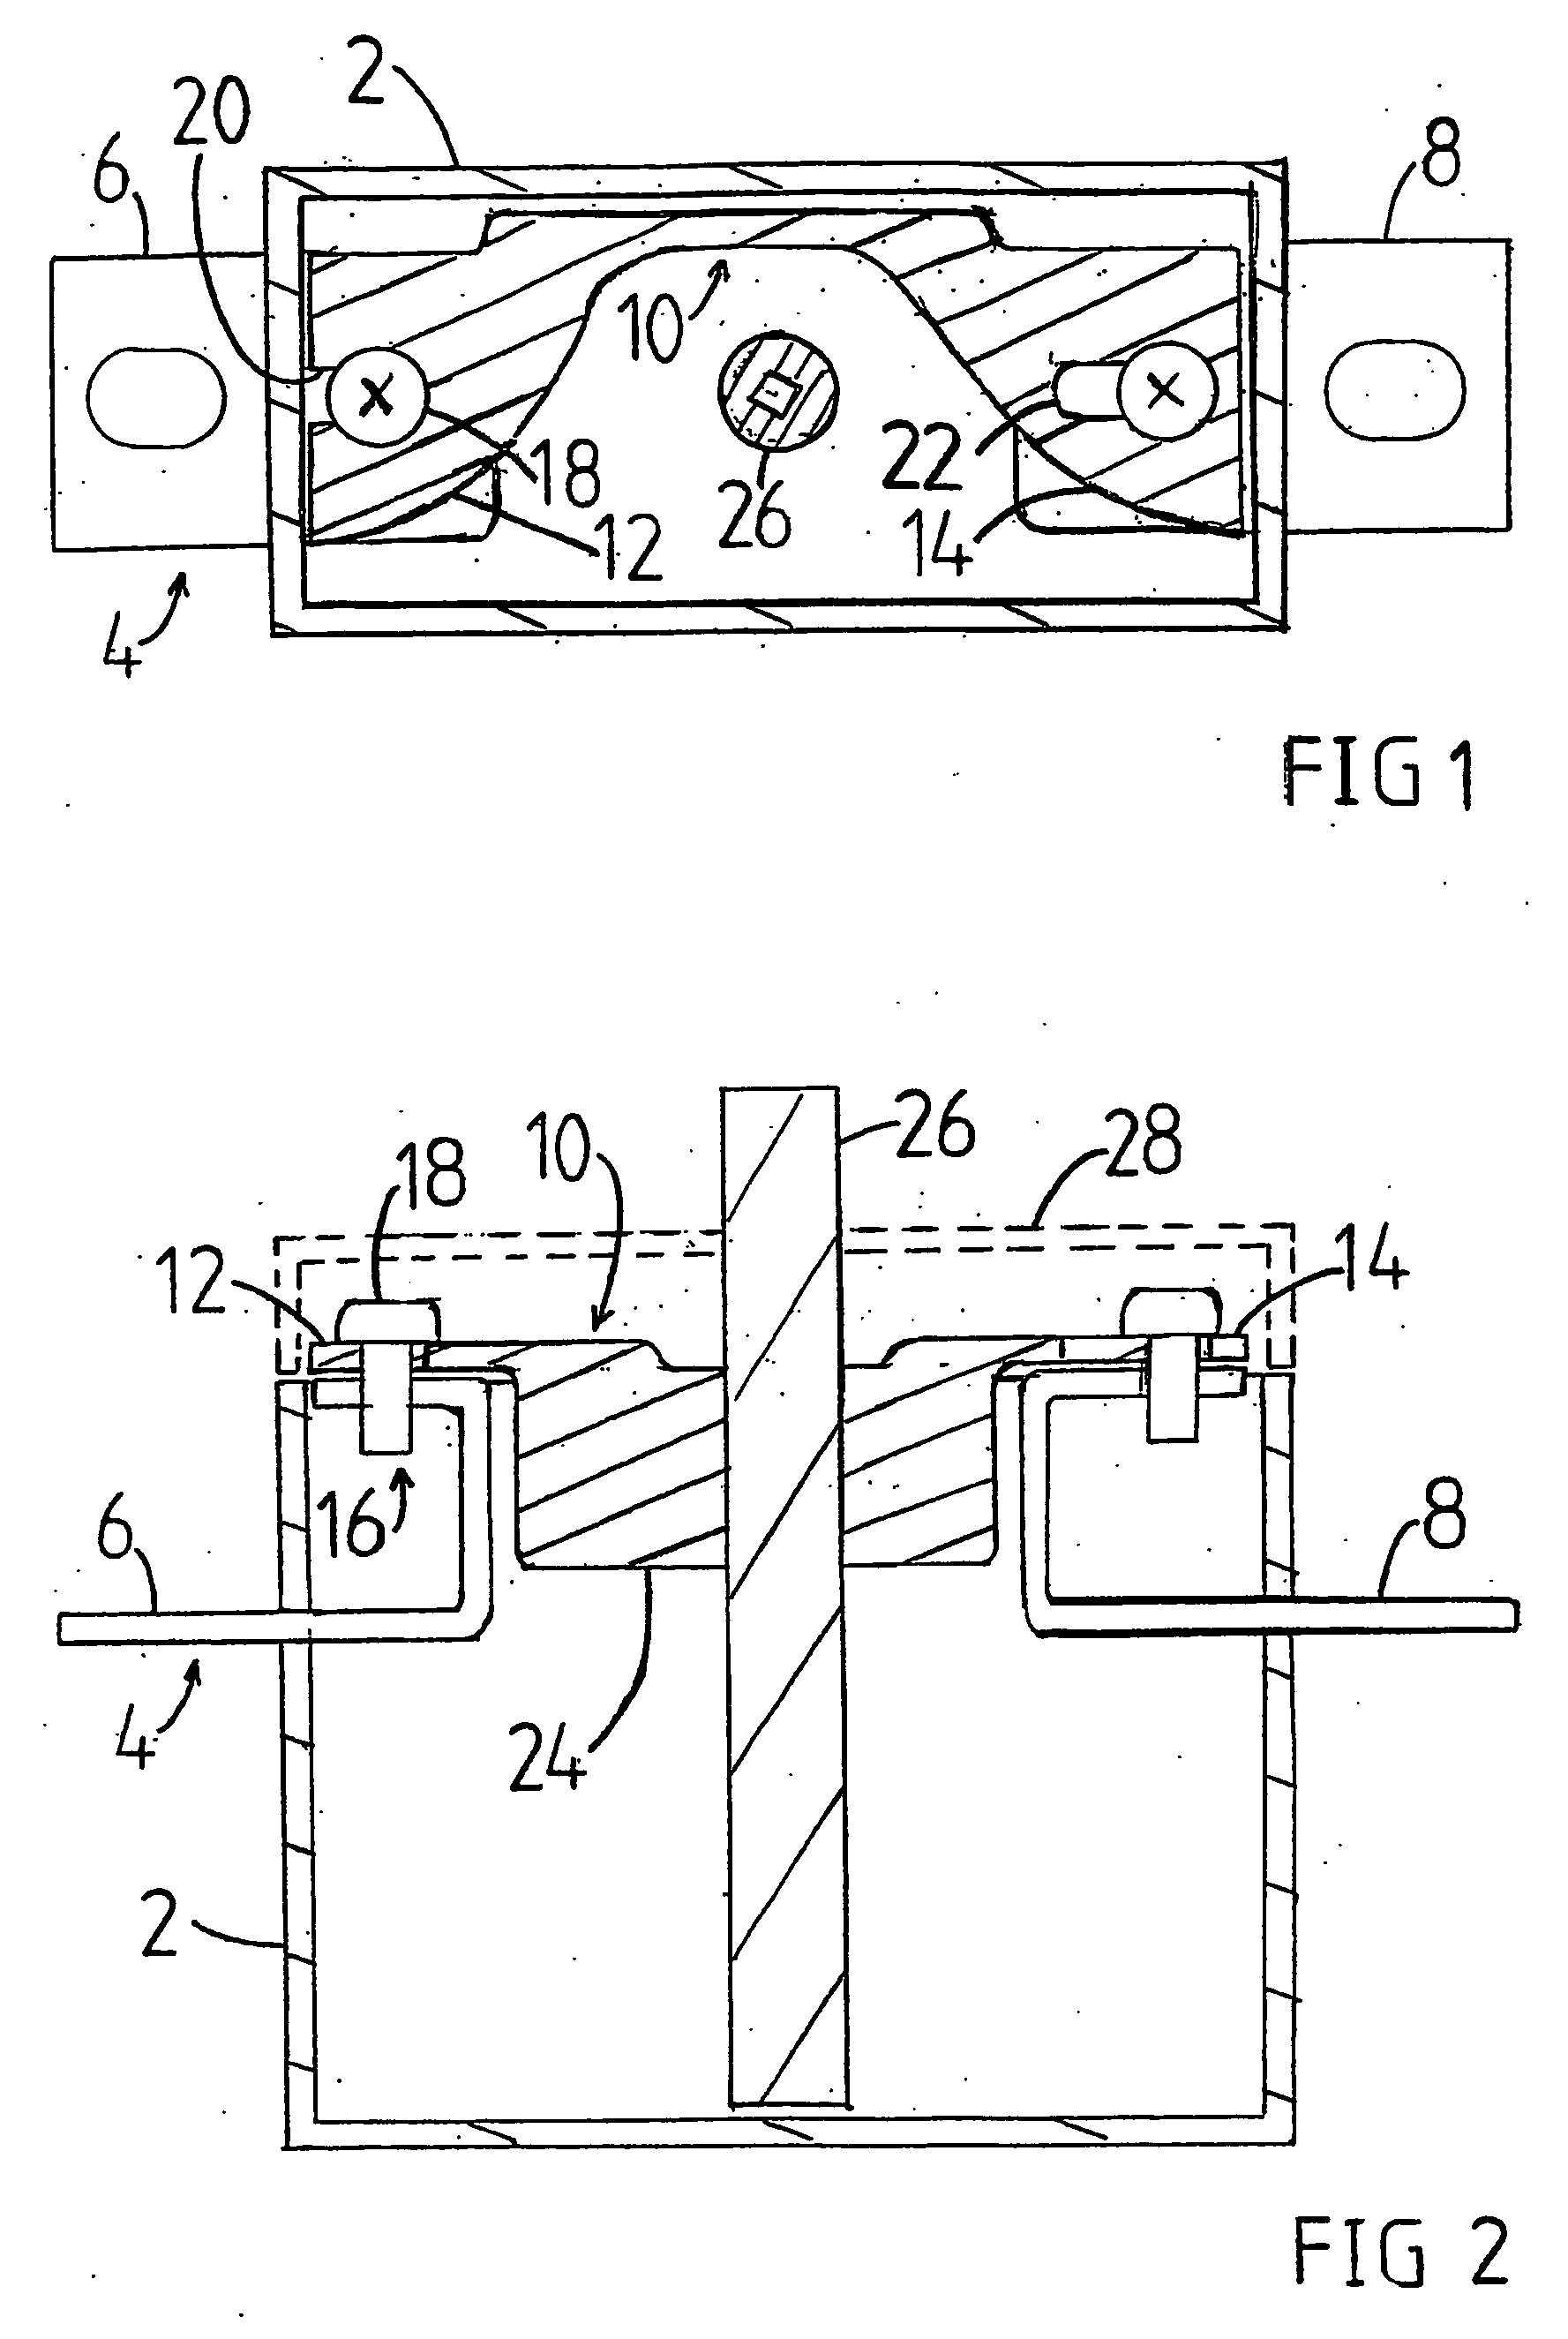 Switching Device Provided with Neutral Conductor